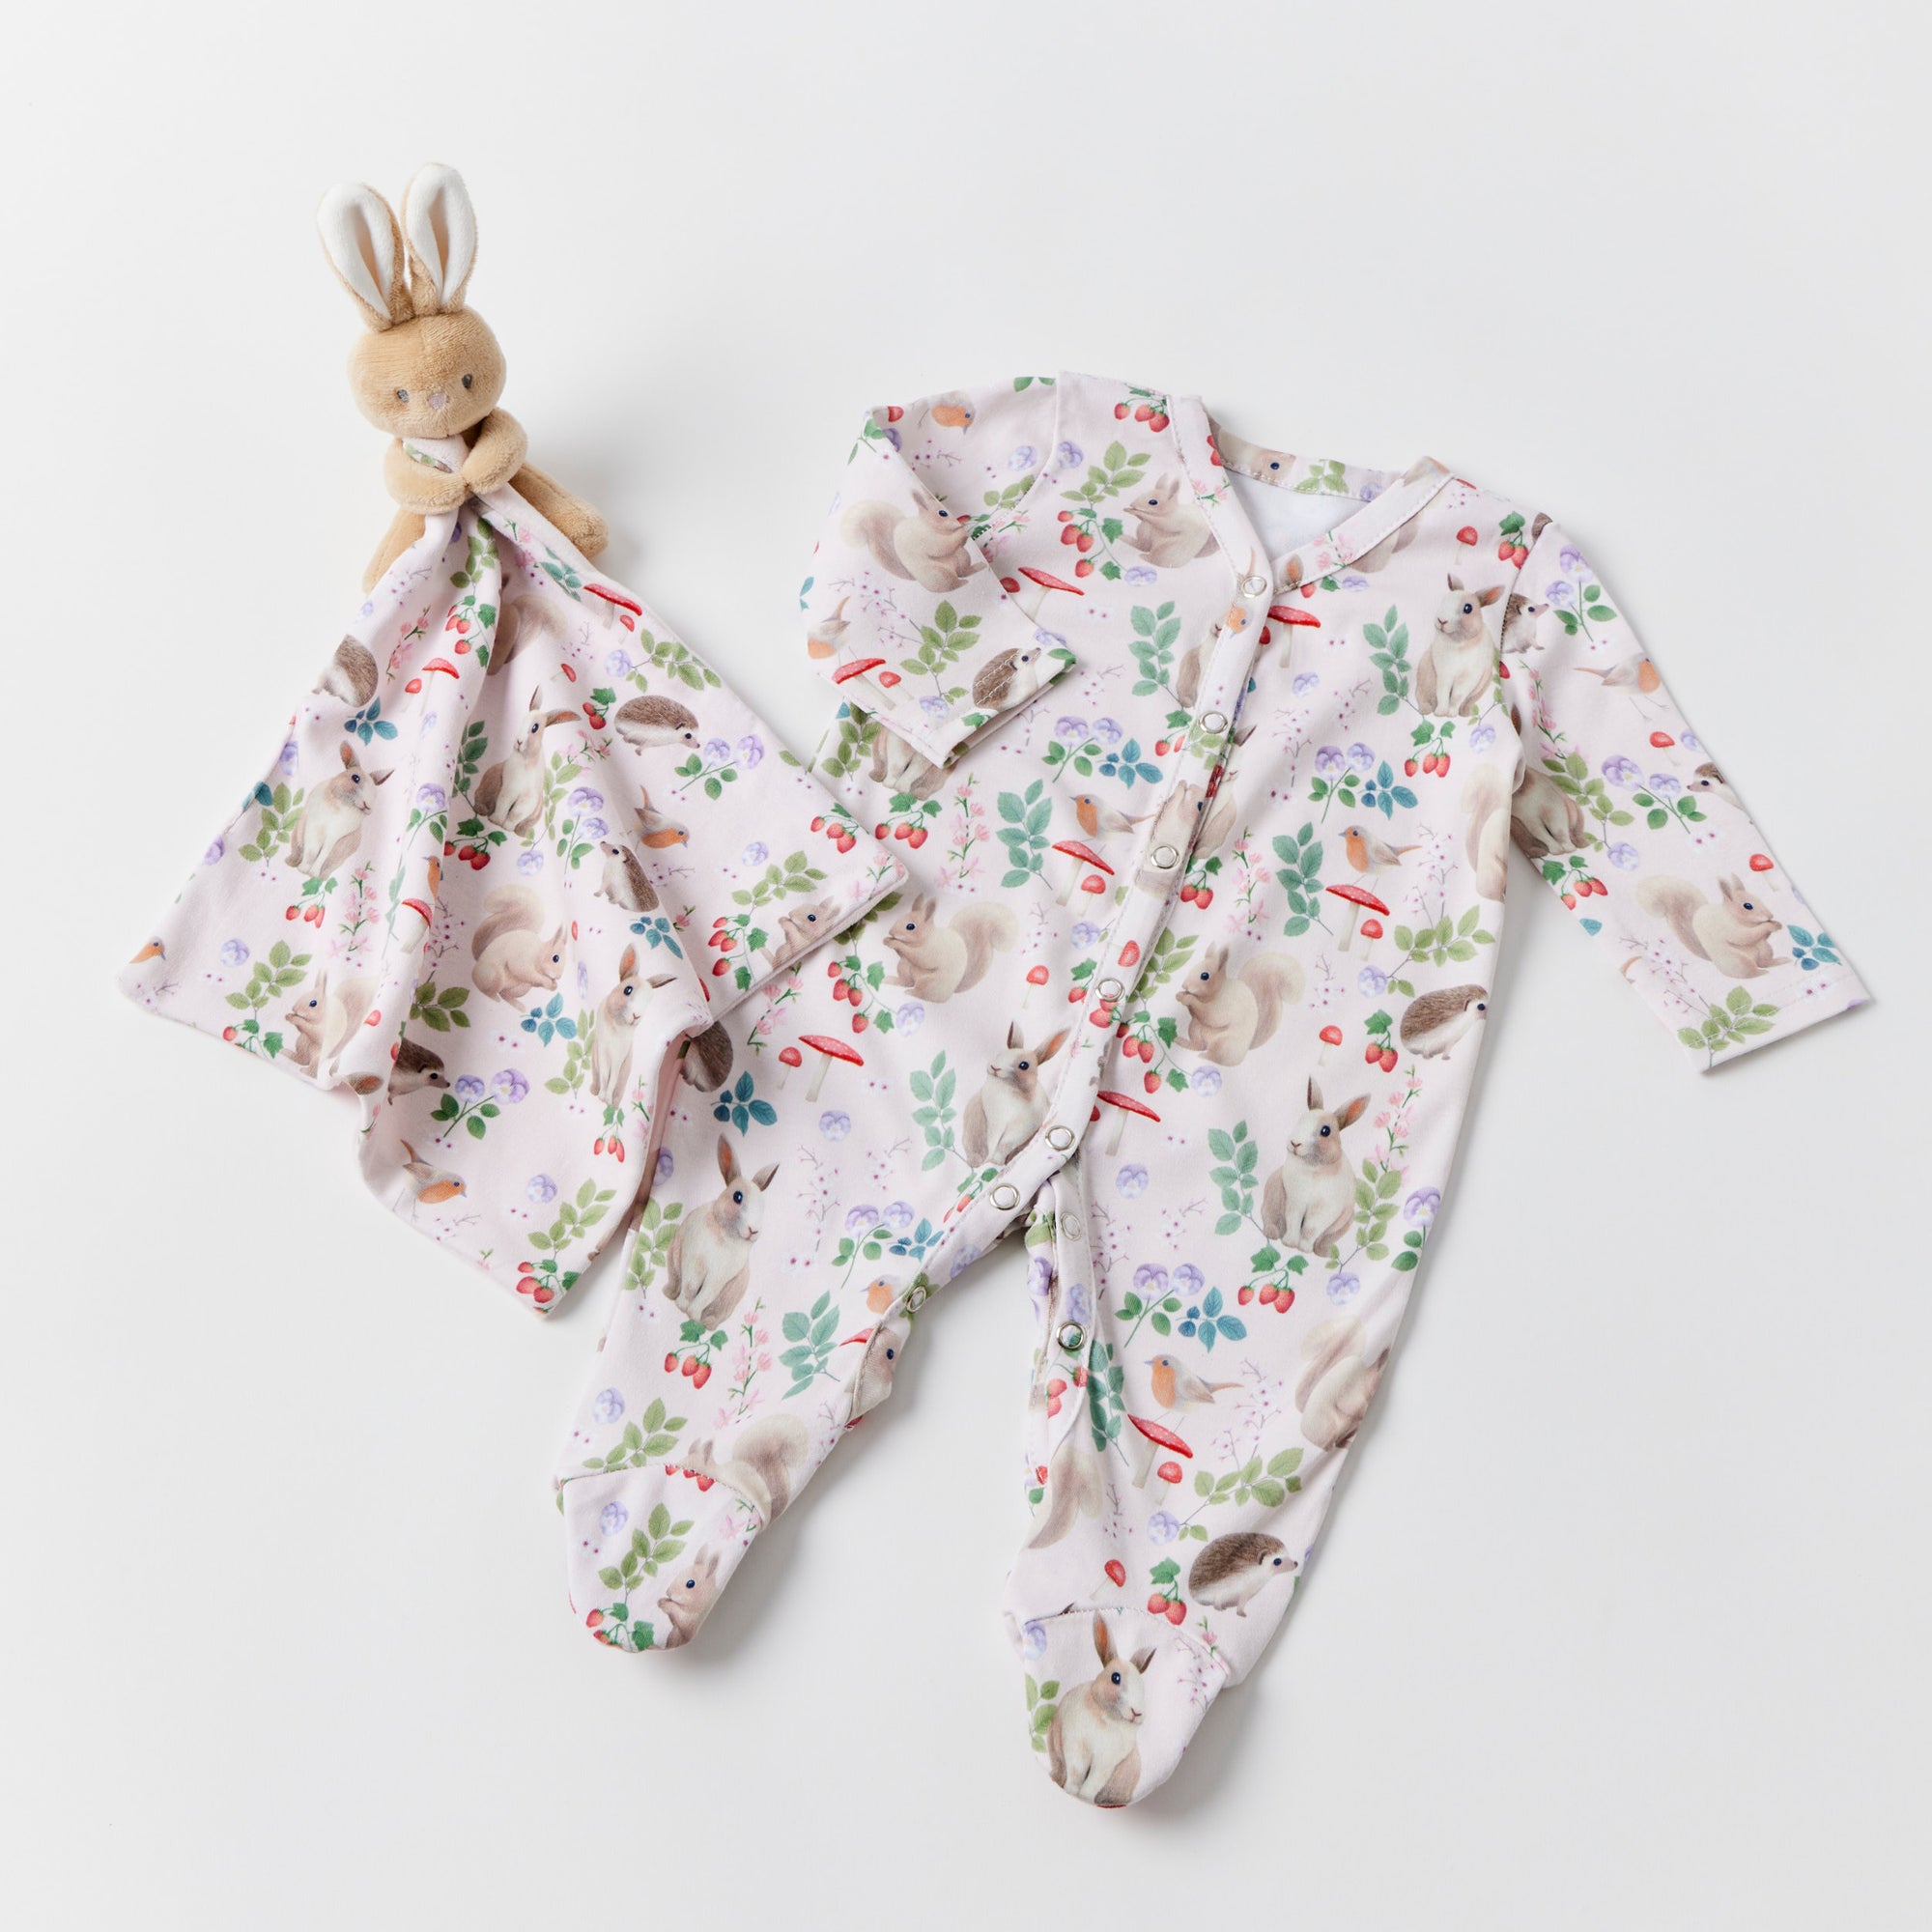 Jiggle and Giggle - Enchanted Romper and Comforter